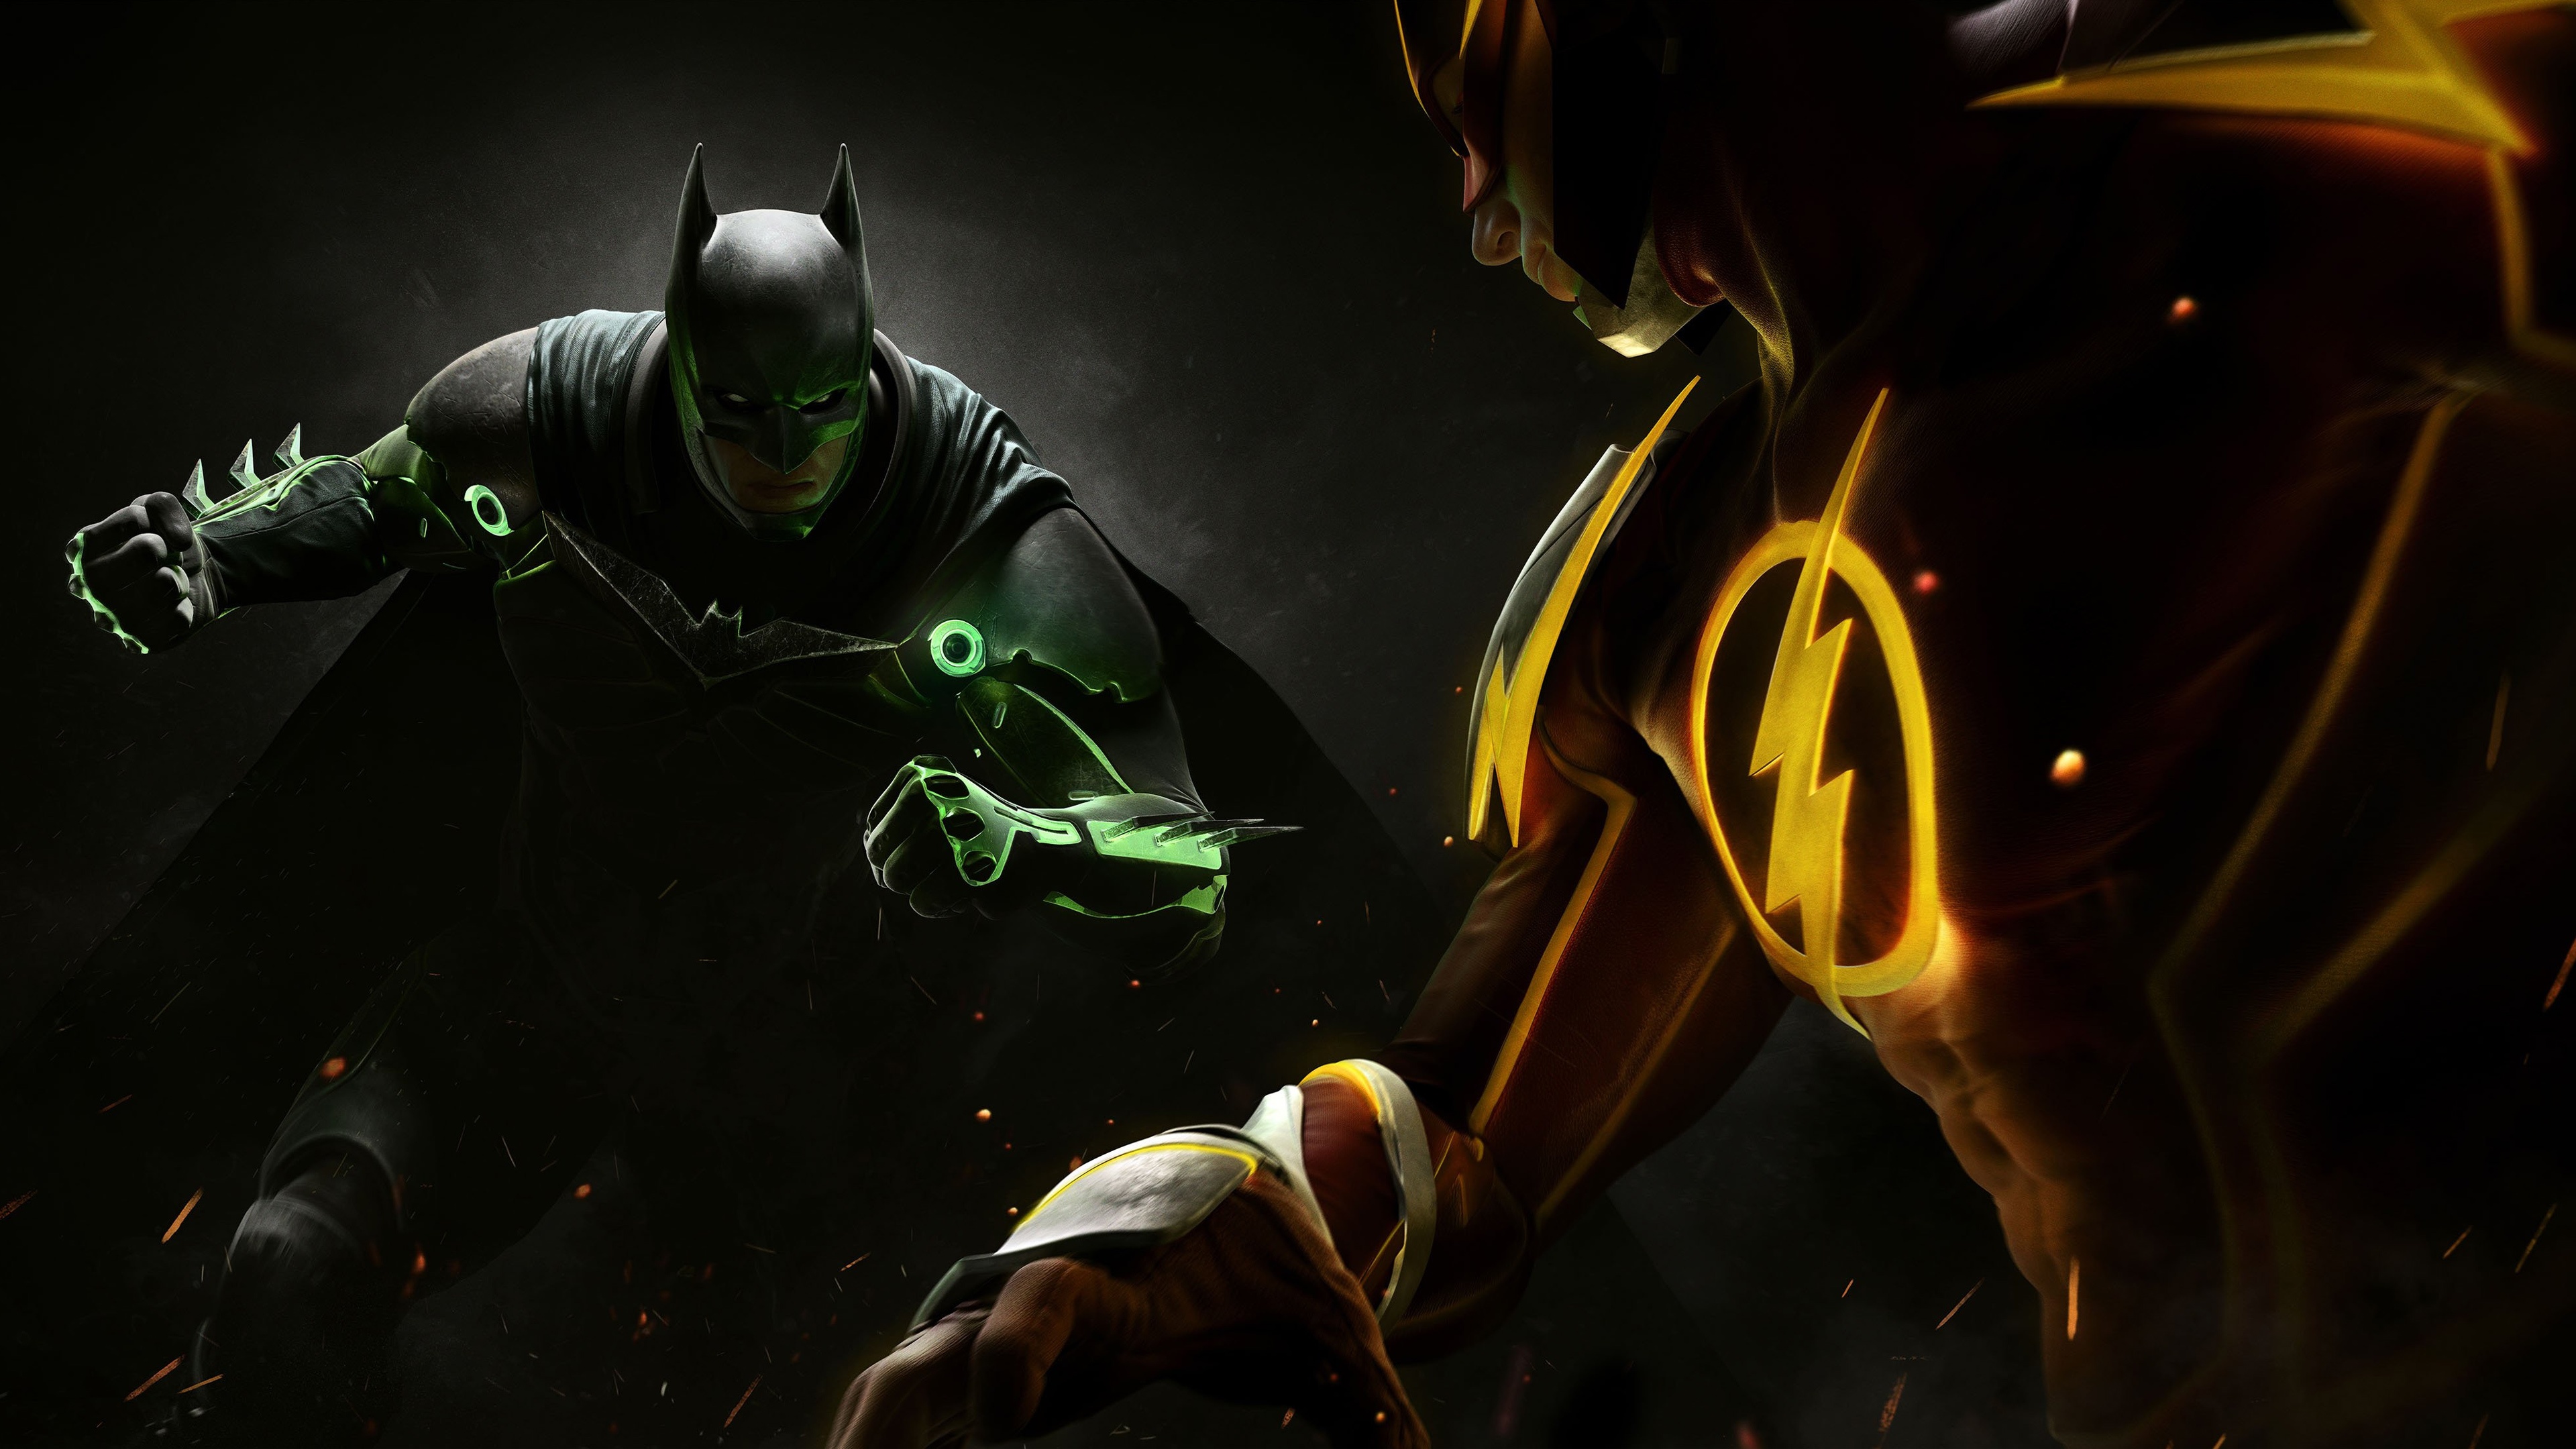 Injustice 2 Wallpapers, Pictures, Images